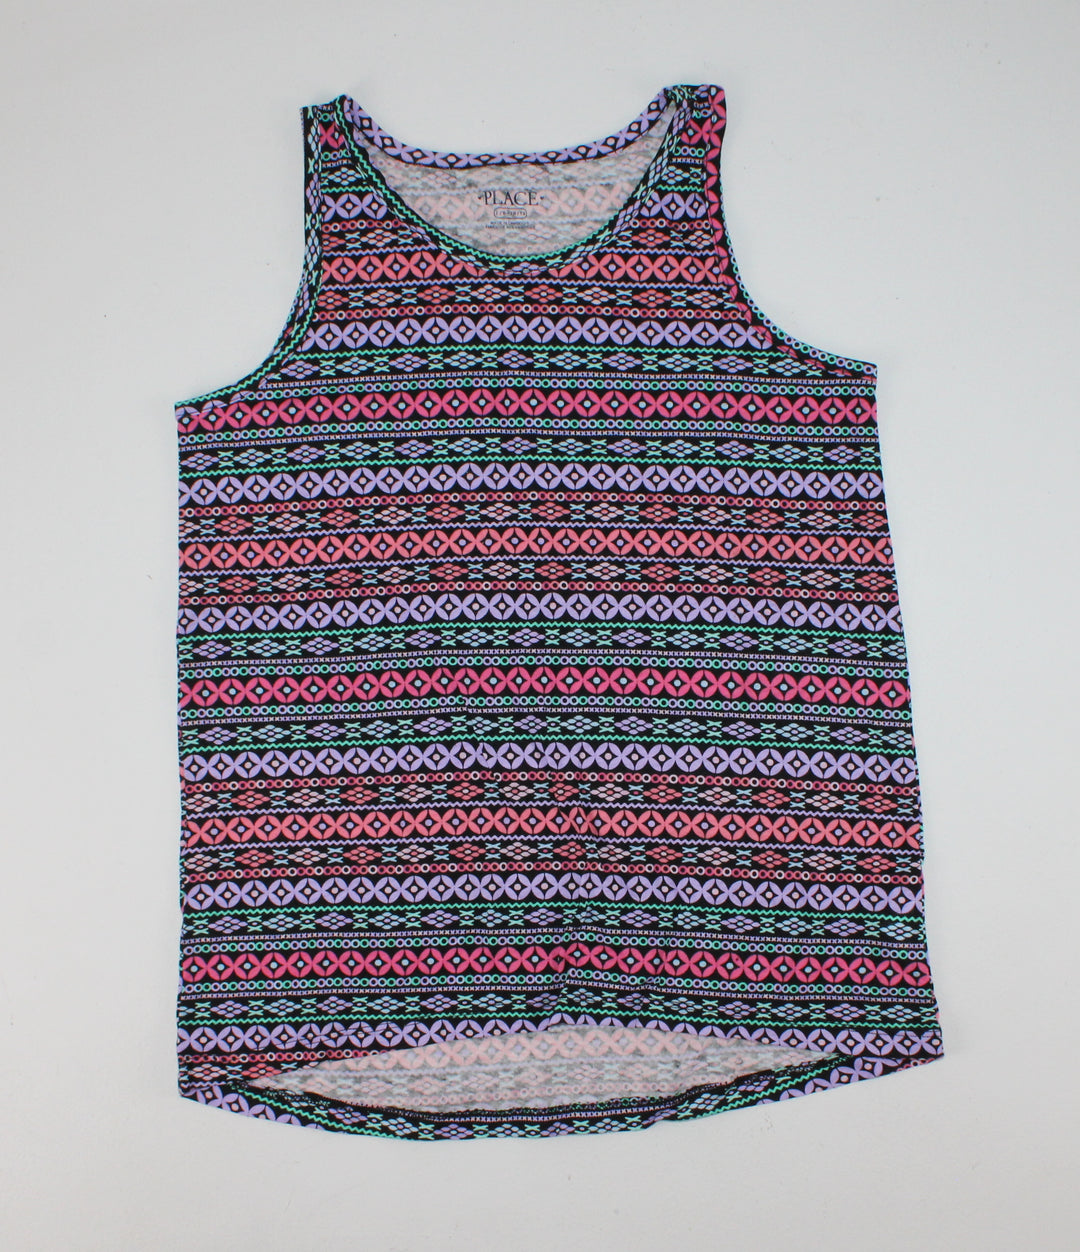 CHILDRENS PLACE PATTERNED TANK TOP 10/12Y EUC